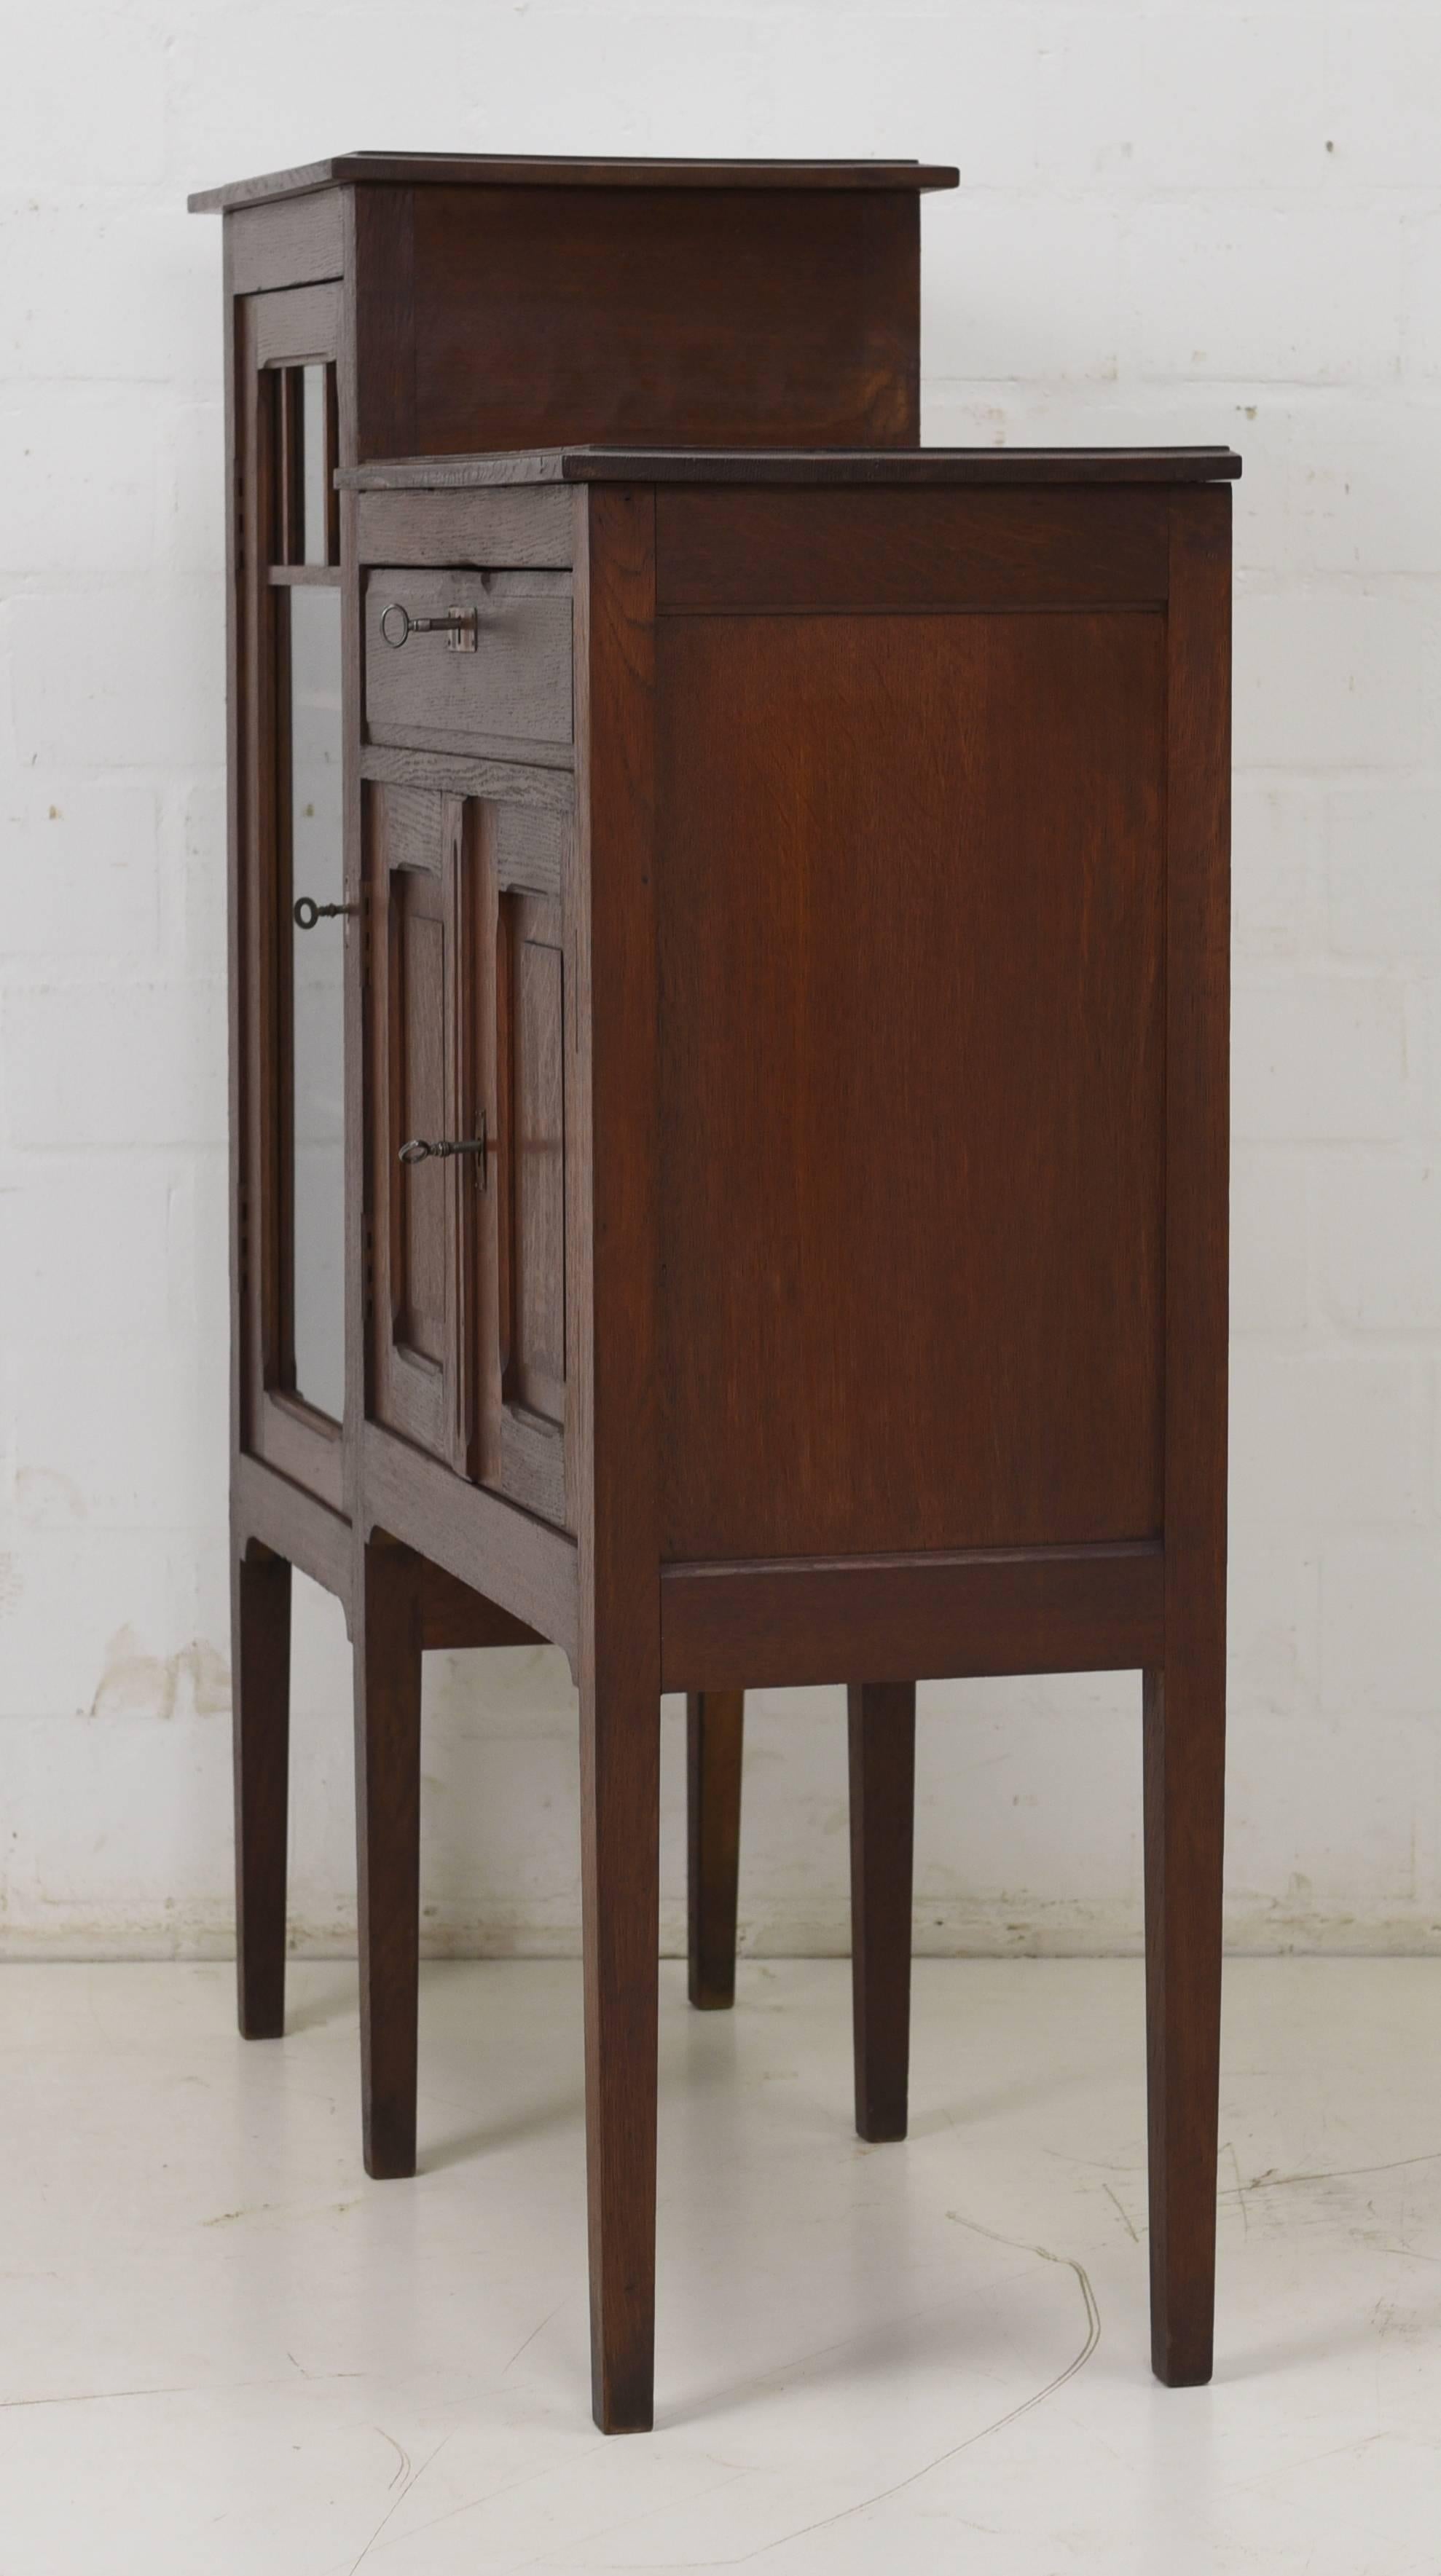 Early 20th Century Art Nouveau Display Cabinet, circa 1915